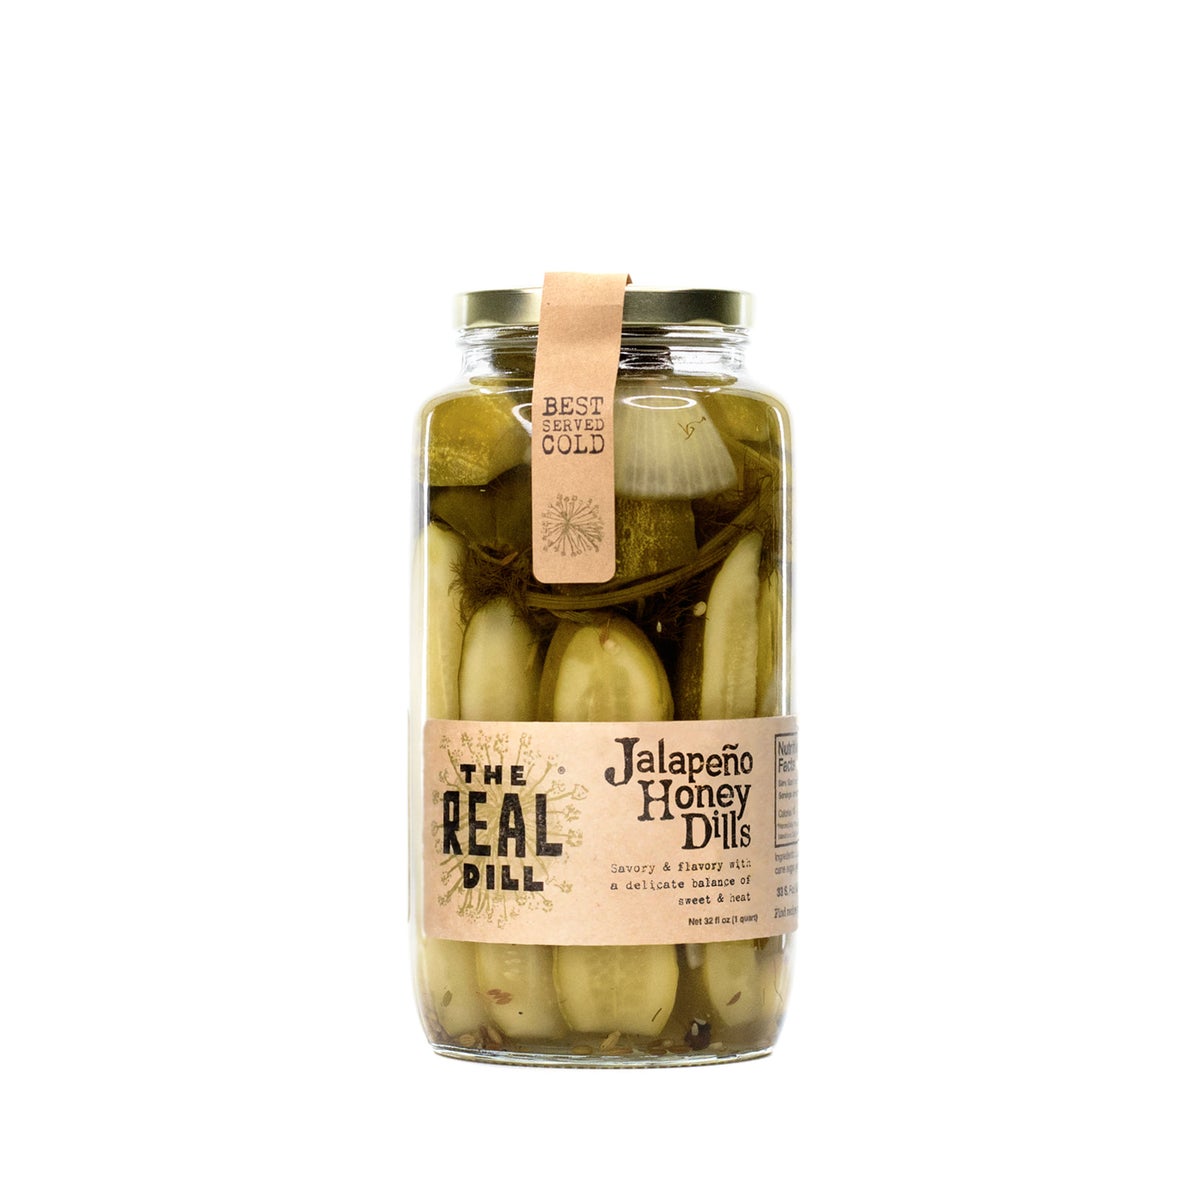 THE REAL DILL - JALAPENO HONEY PICKLES